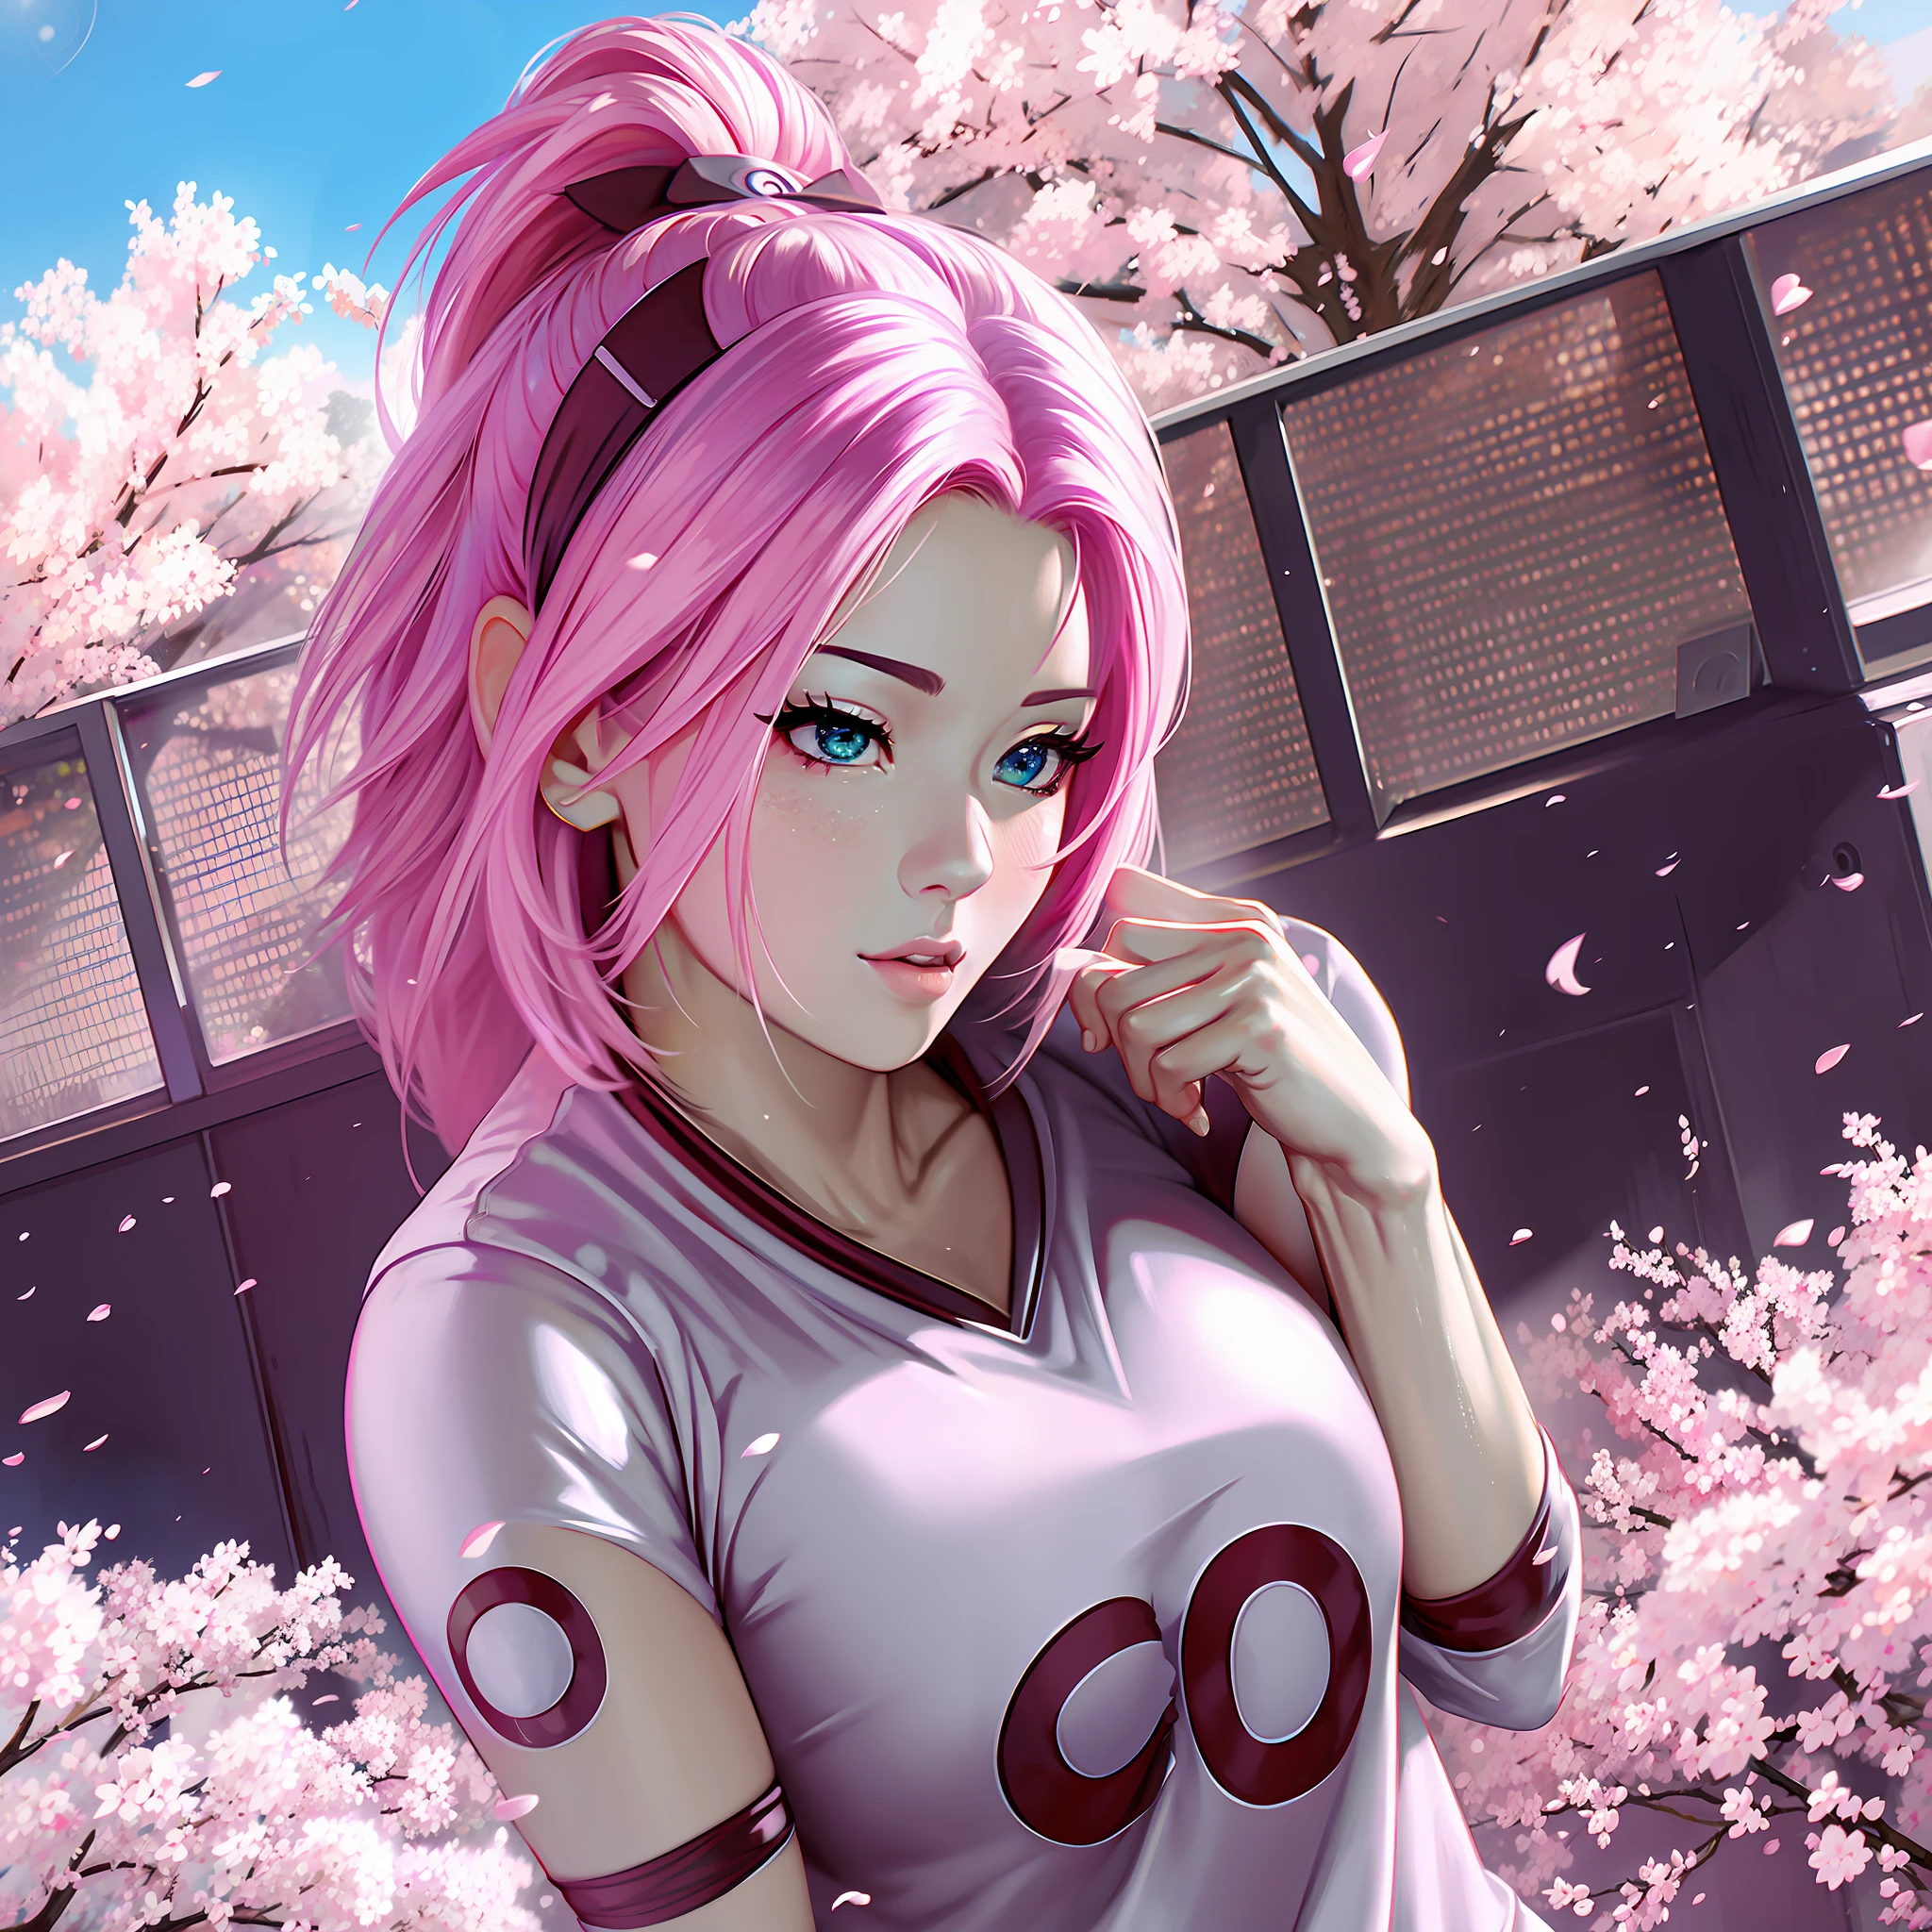 Sakura with the football shirt pose sexy anime super realistic and well detailed